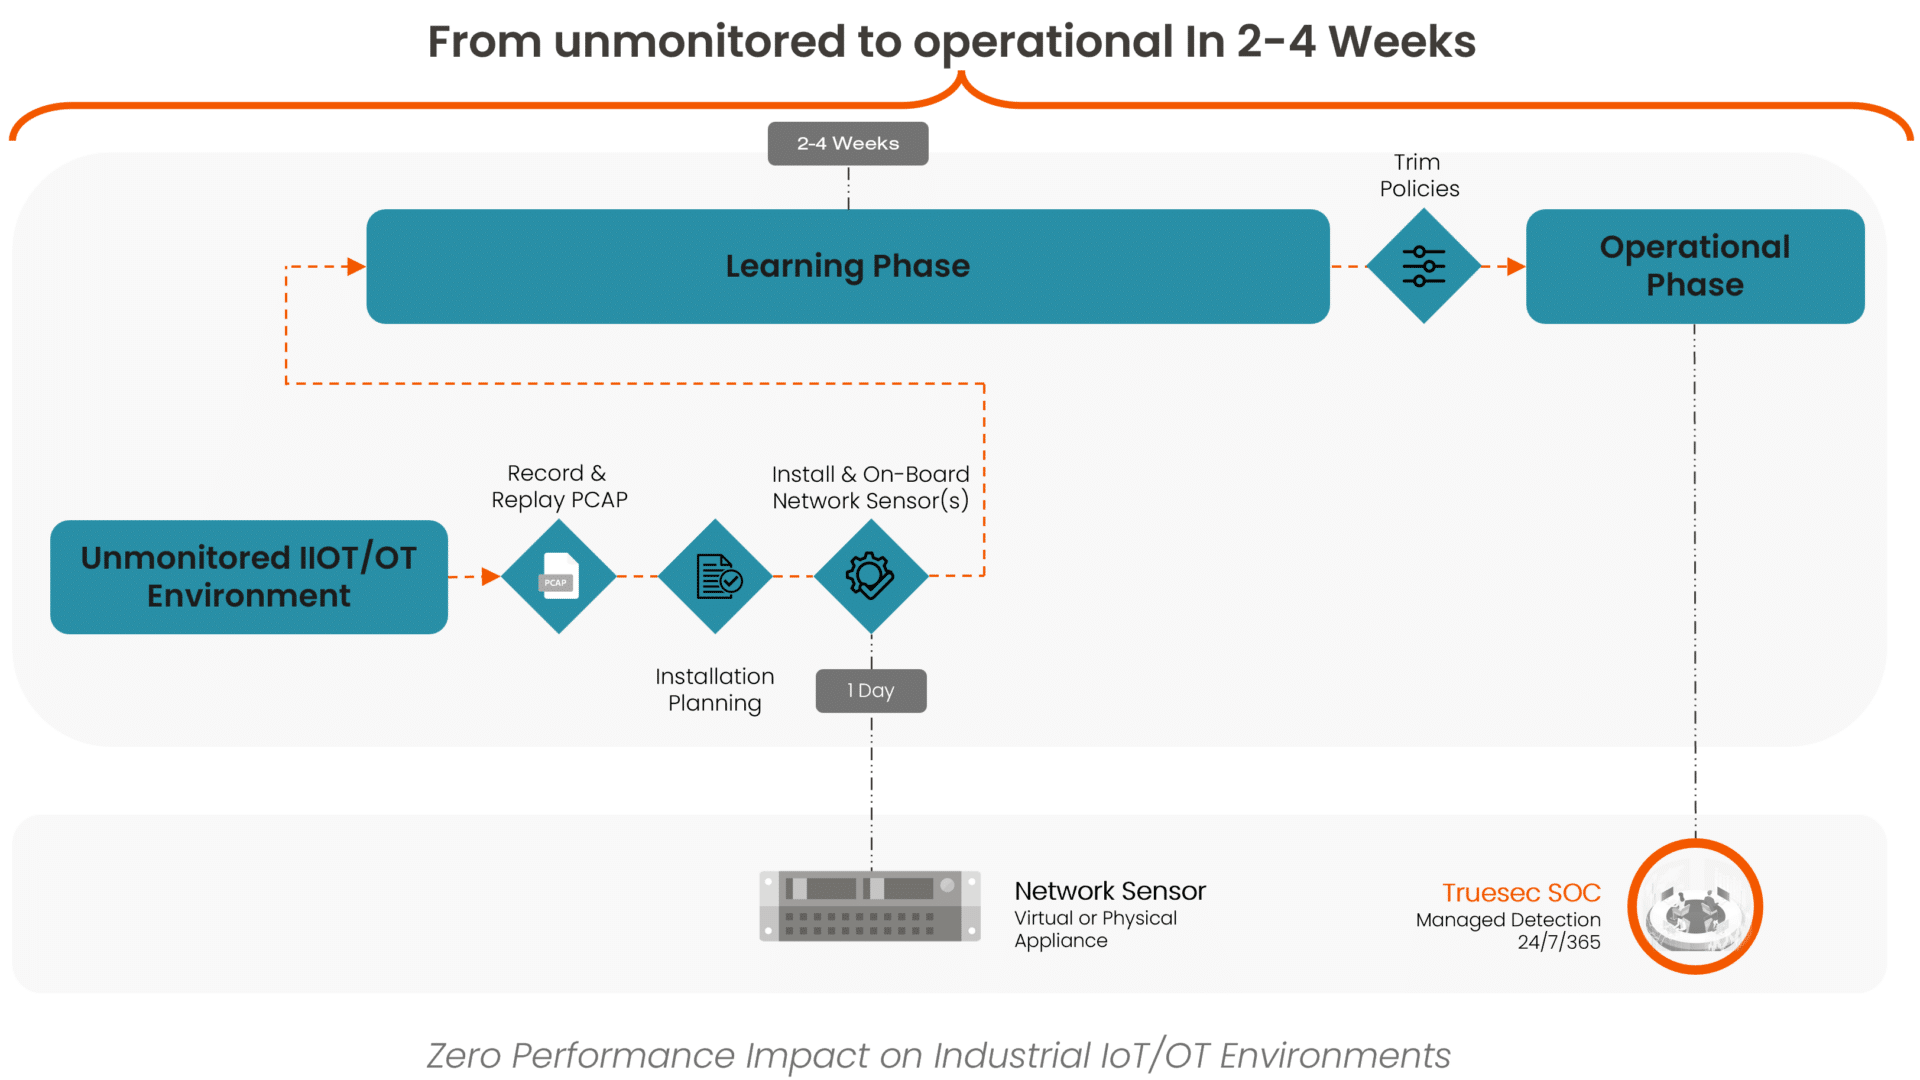 Implementation from unmonotored to operational takes 2-4 weeks. install and onboarding takes about a day, then the learning phase takes 2-4 weeks. Before operational phase the policies are trimmed. 